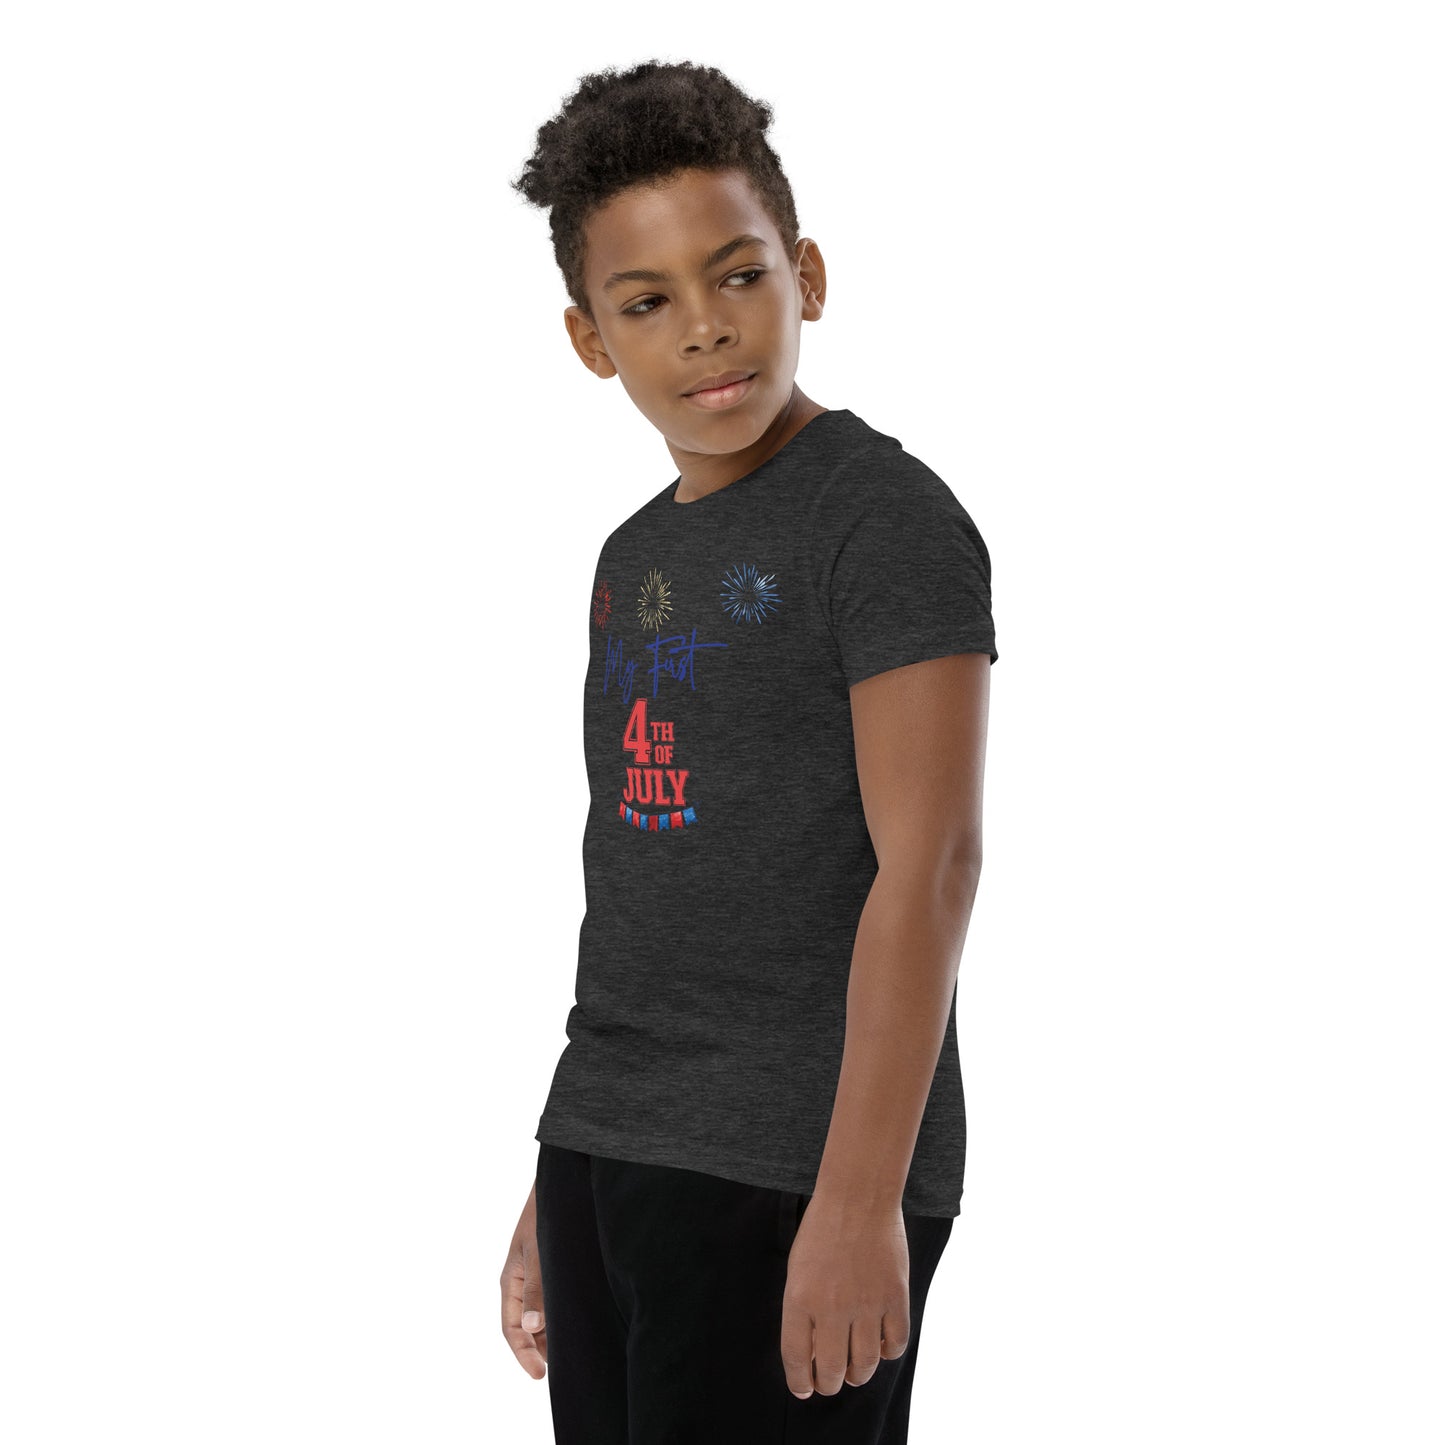 My First 4th Of July Youth Short Sleeve T-Shirt